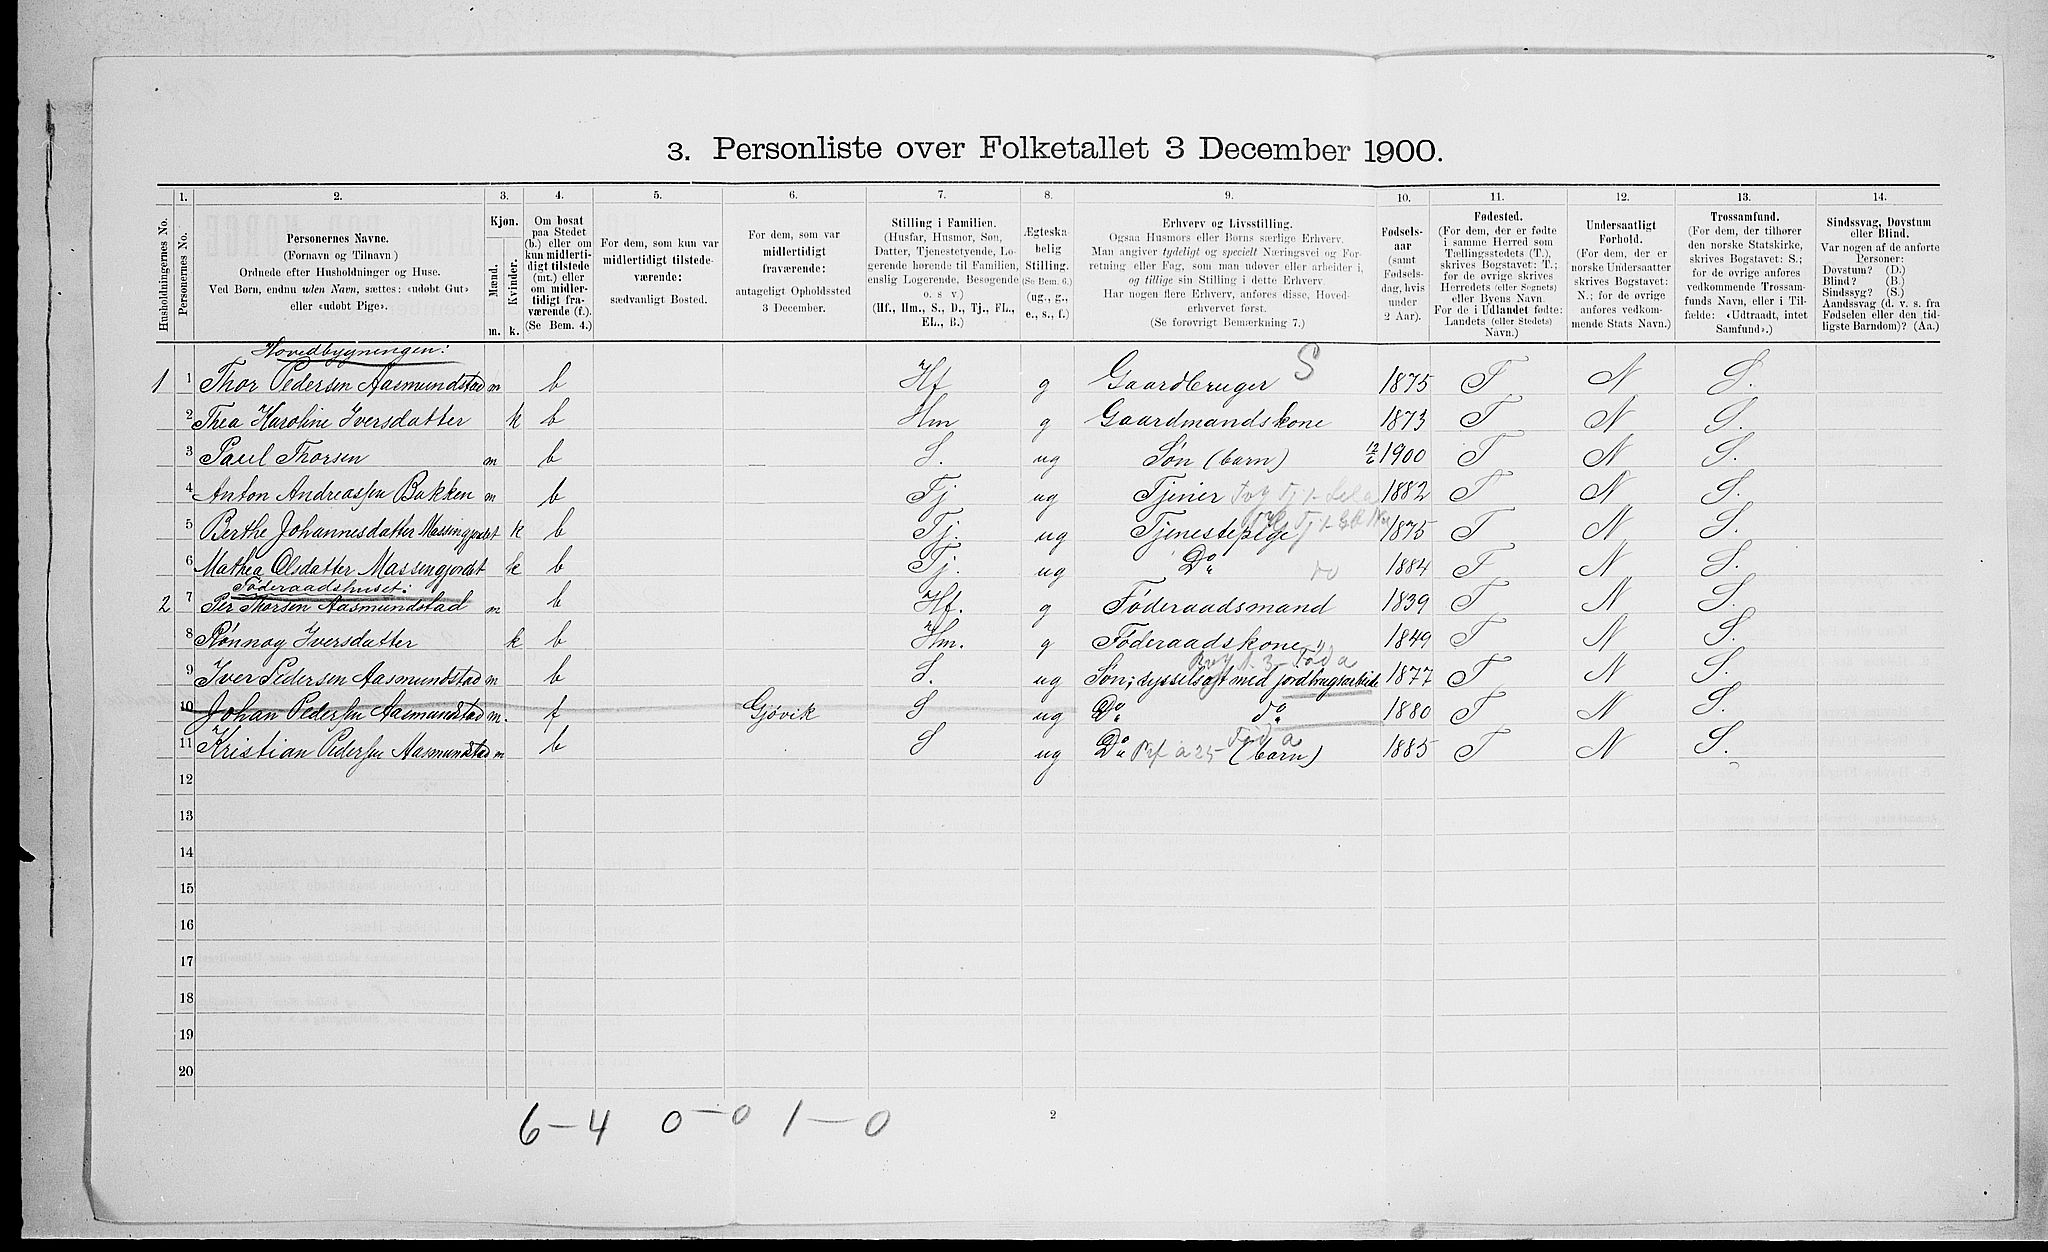 SAH, 1900 census for Nord-Fron, 1900, p. 341